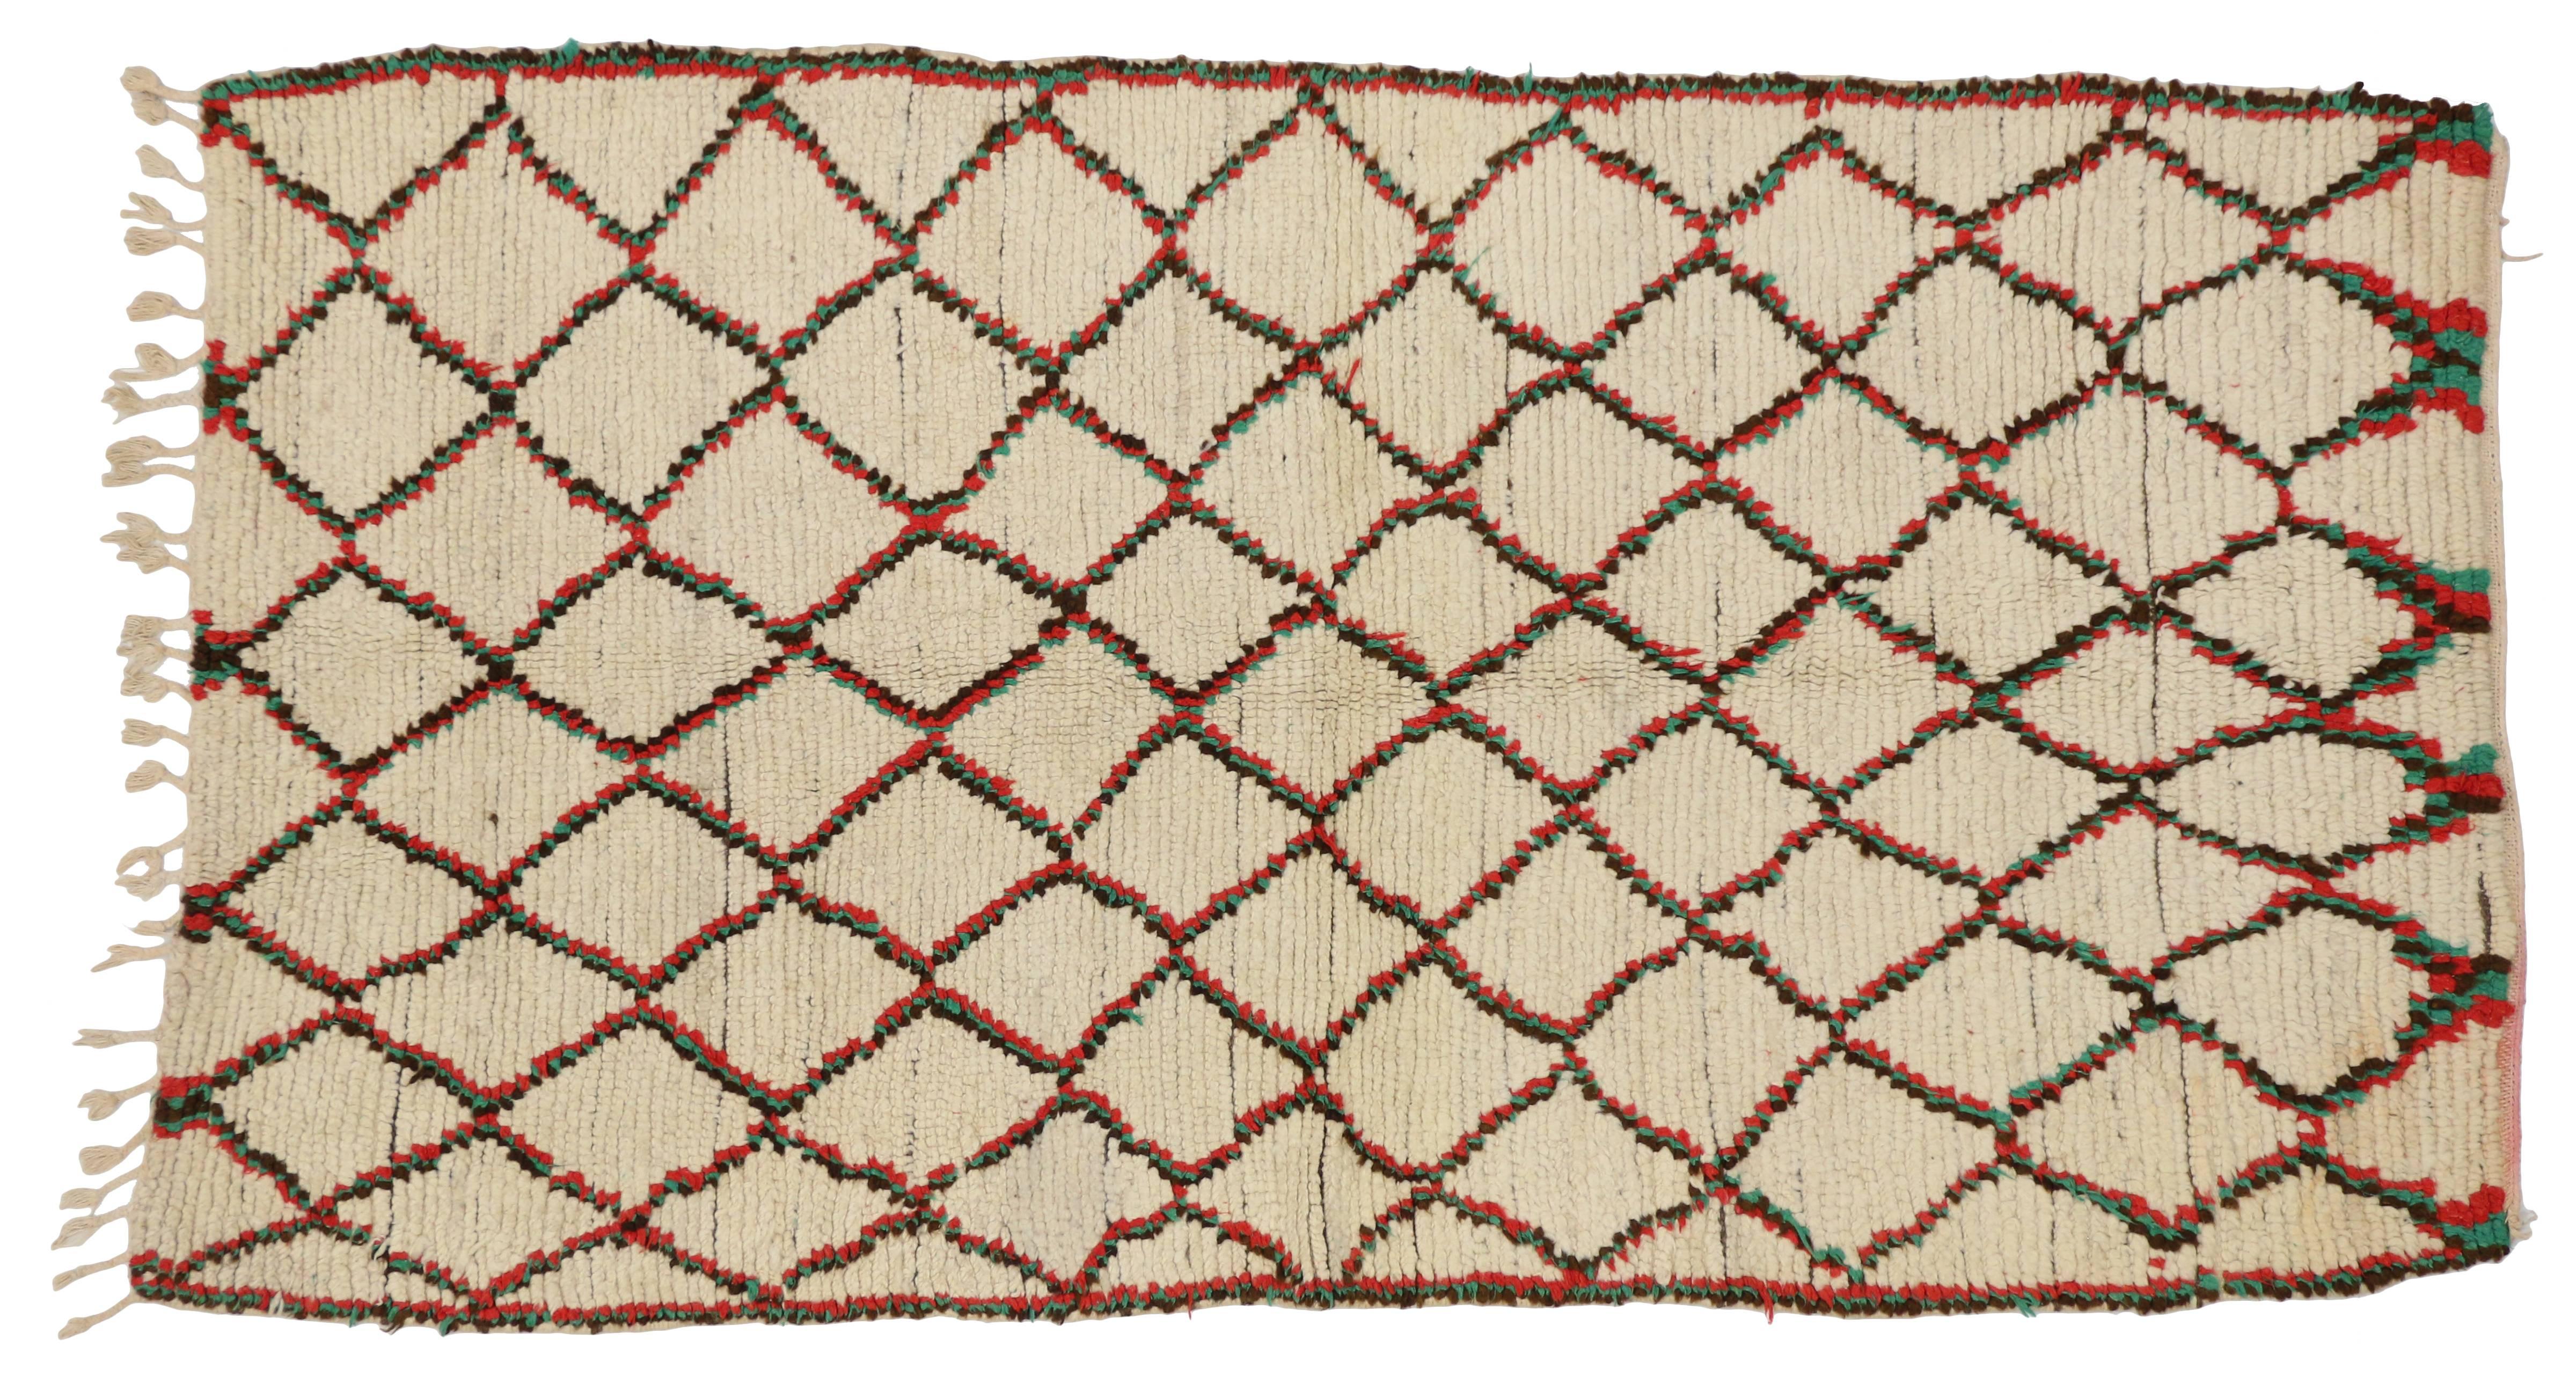 Hand-Knotted Vintage Berber Moroccan Azilal Rug with Hygge Vibes